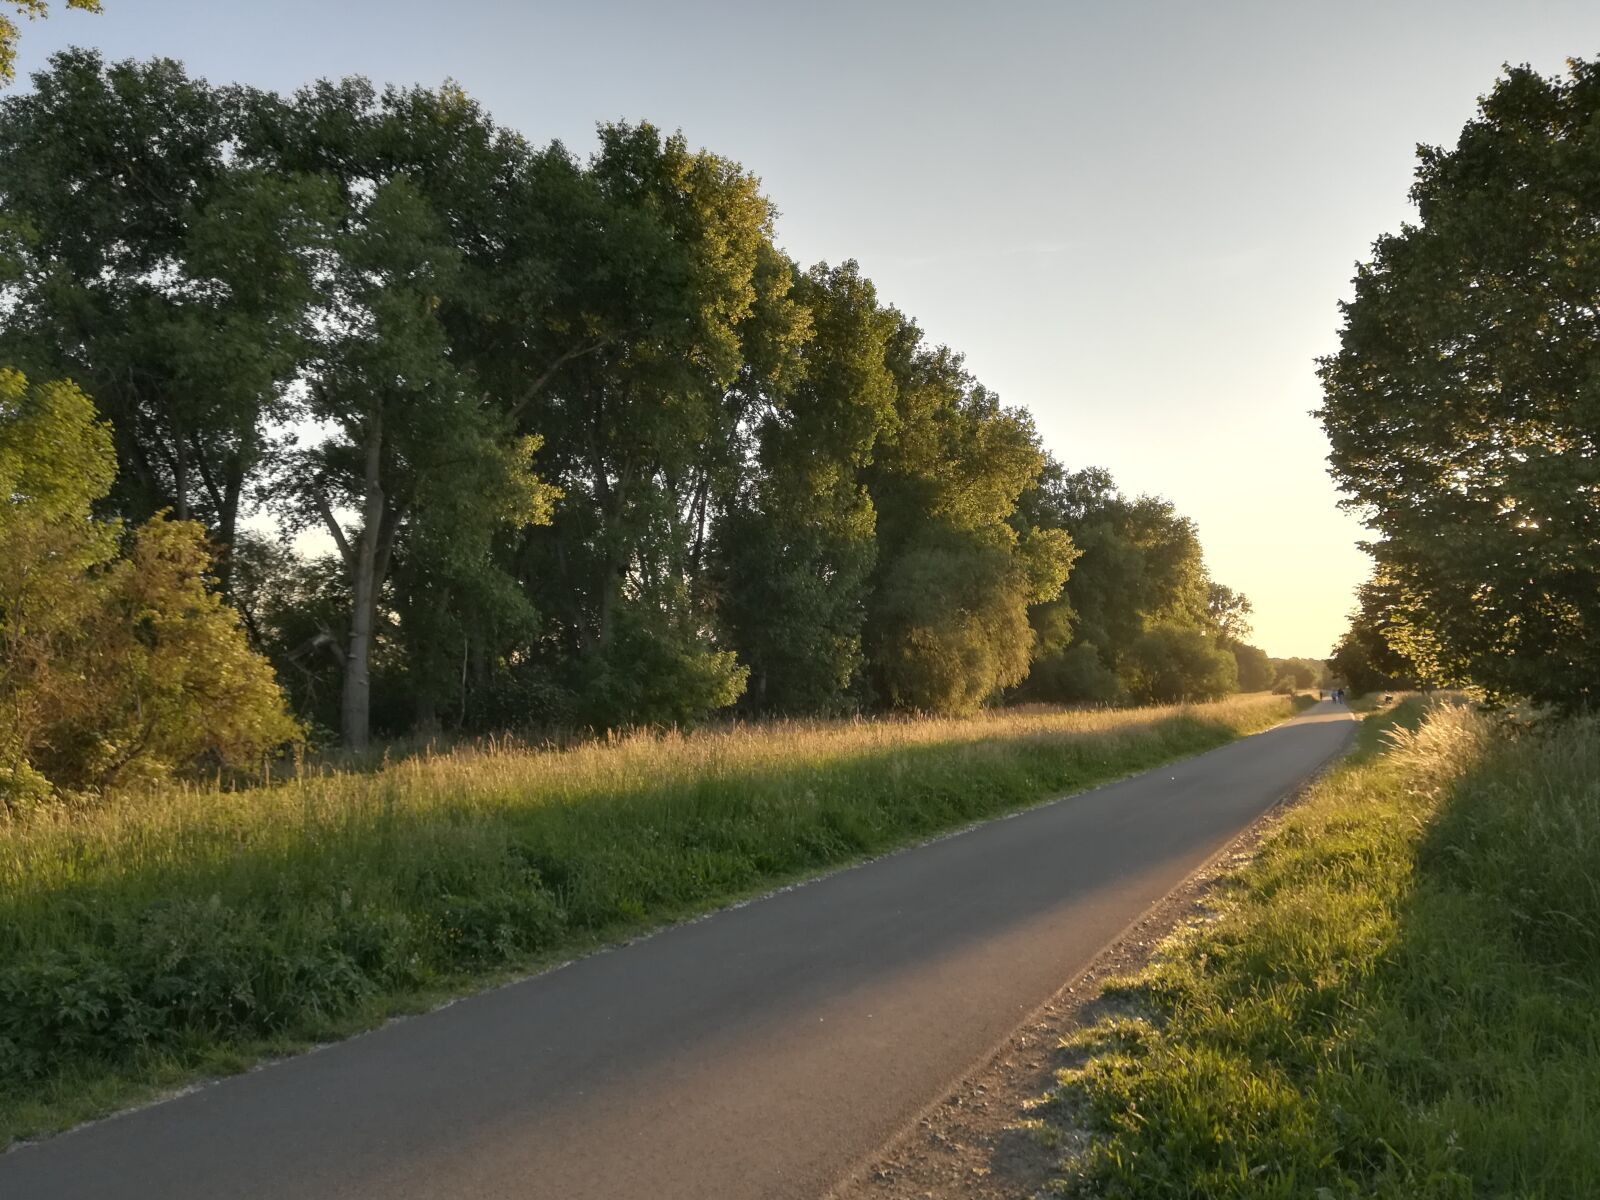 HUAWEI P10 lite sample photo. Bicycle path, trees, evening photography